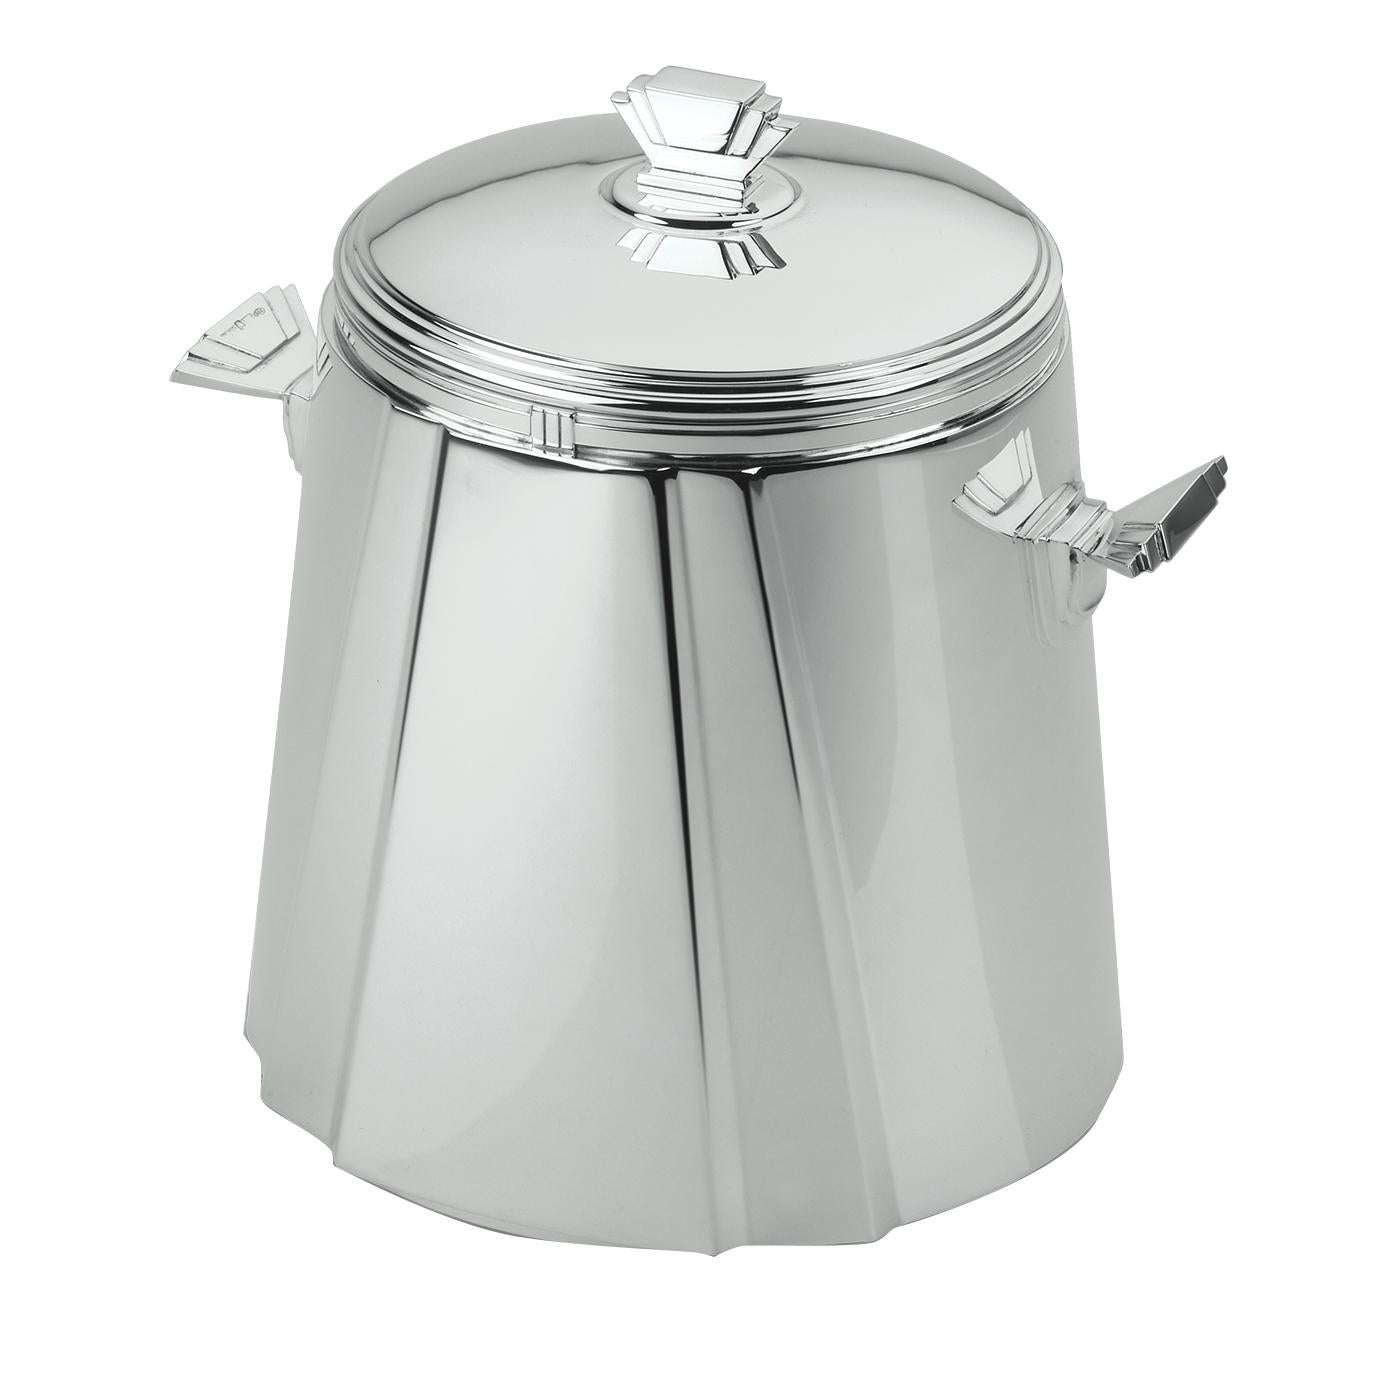 Inspired by the clear lines, bold geometry, and richly detailed work of early 20th century Art Deco artwork, this ice bucket is a sophisticated accent in any serveware collection. The bucket's lid and insulated container boasts a cone Silhouette